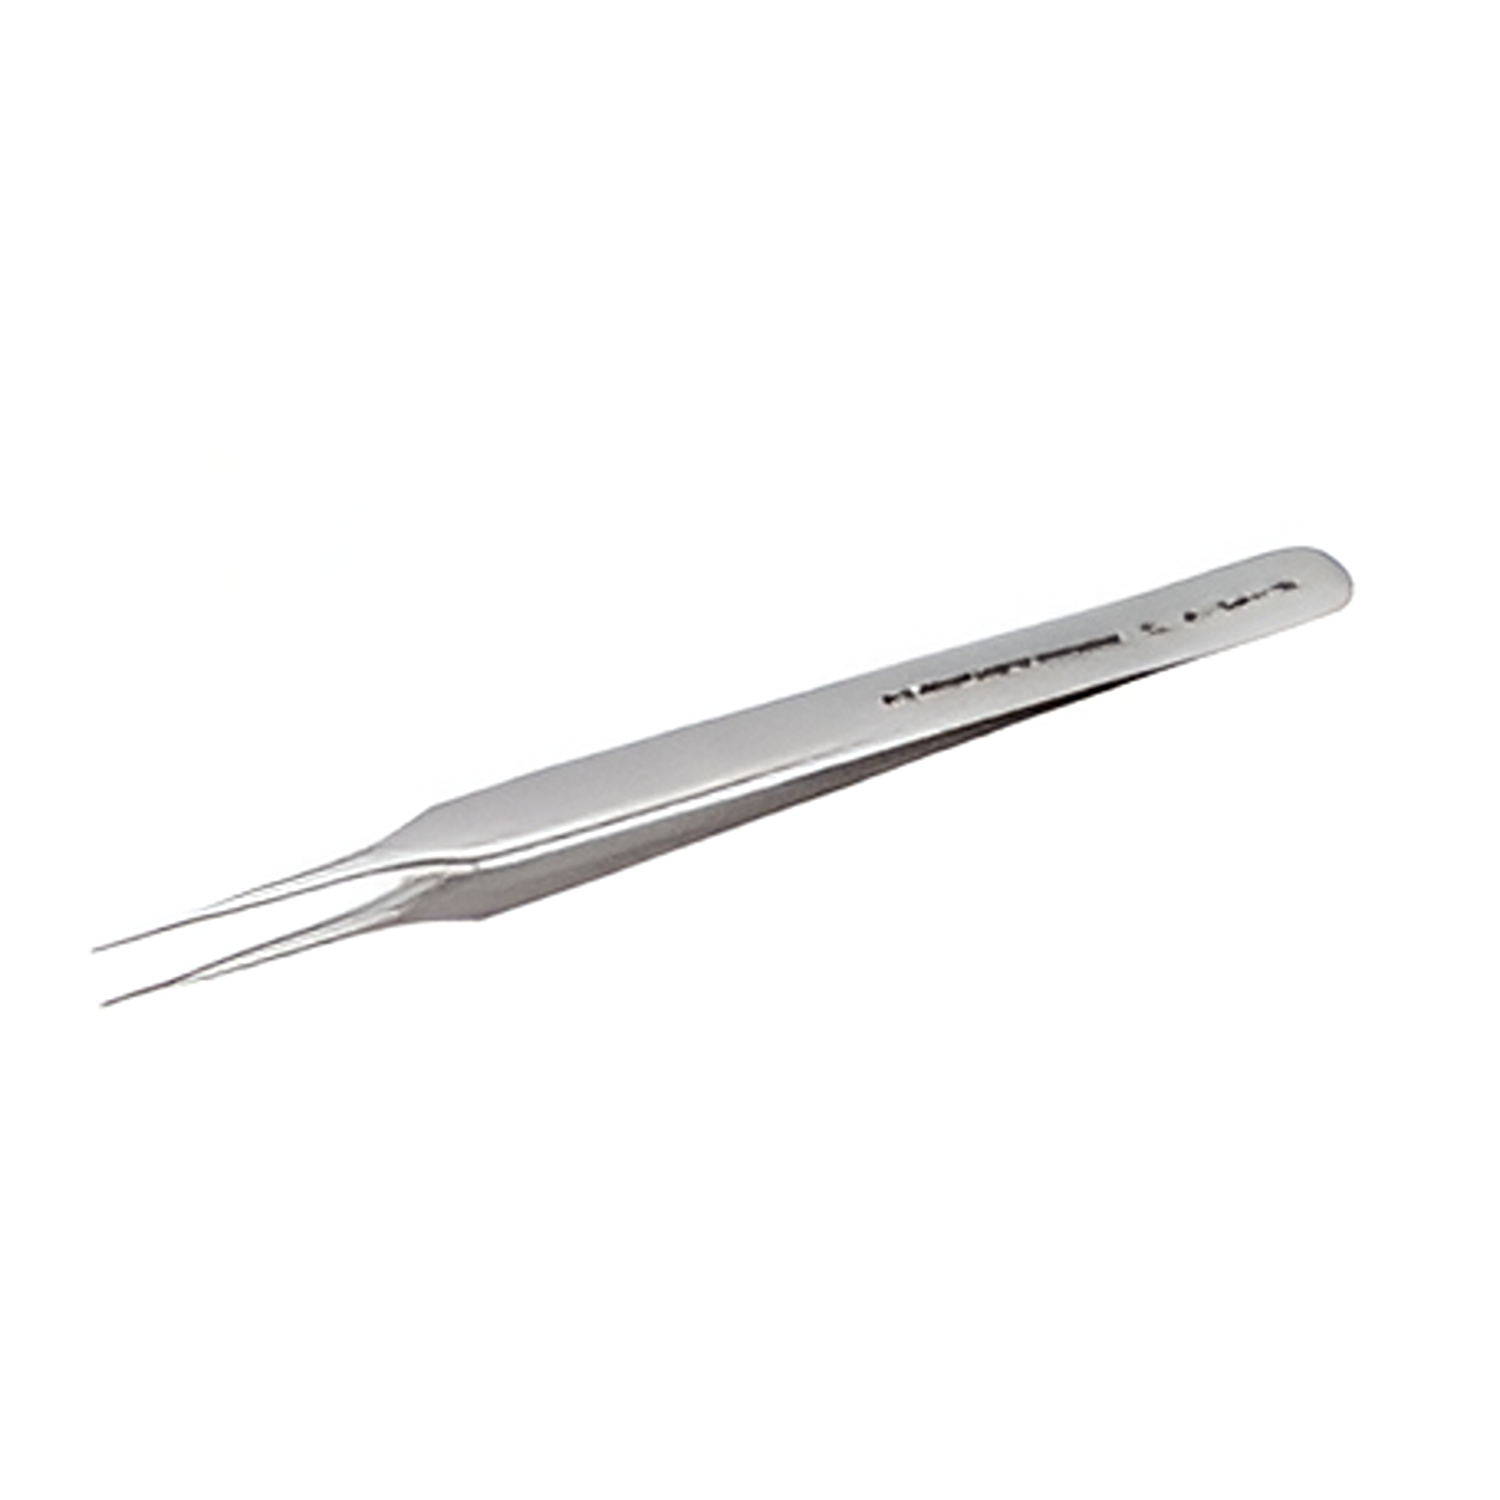 BAHCO TL 4-SA-SL Tweezers with Tapered and Extra Fine Tips 110 mm - Premium Tweezers from BAHCO - Shop now at Yew Aik.